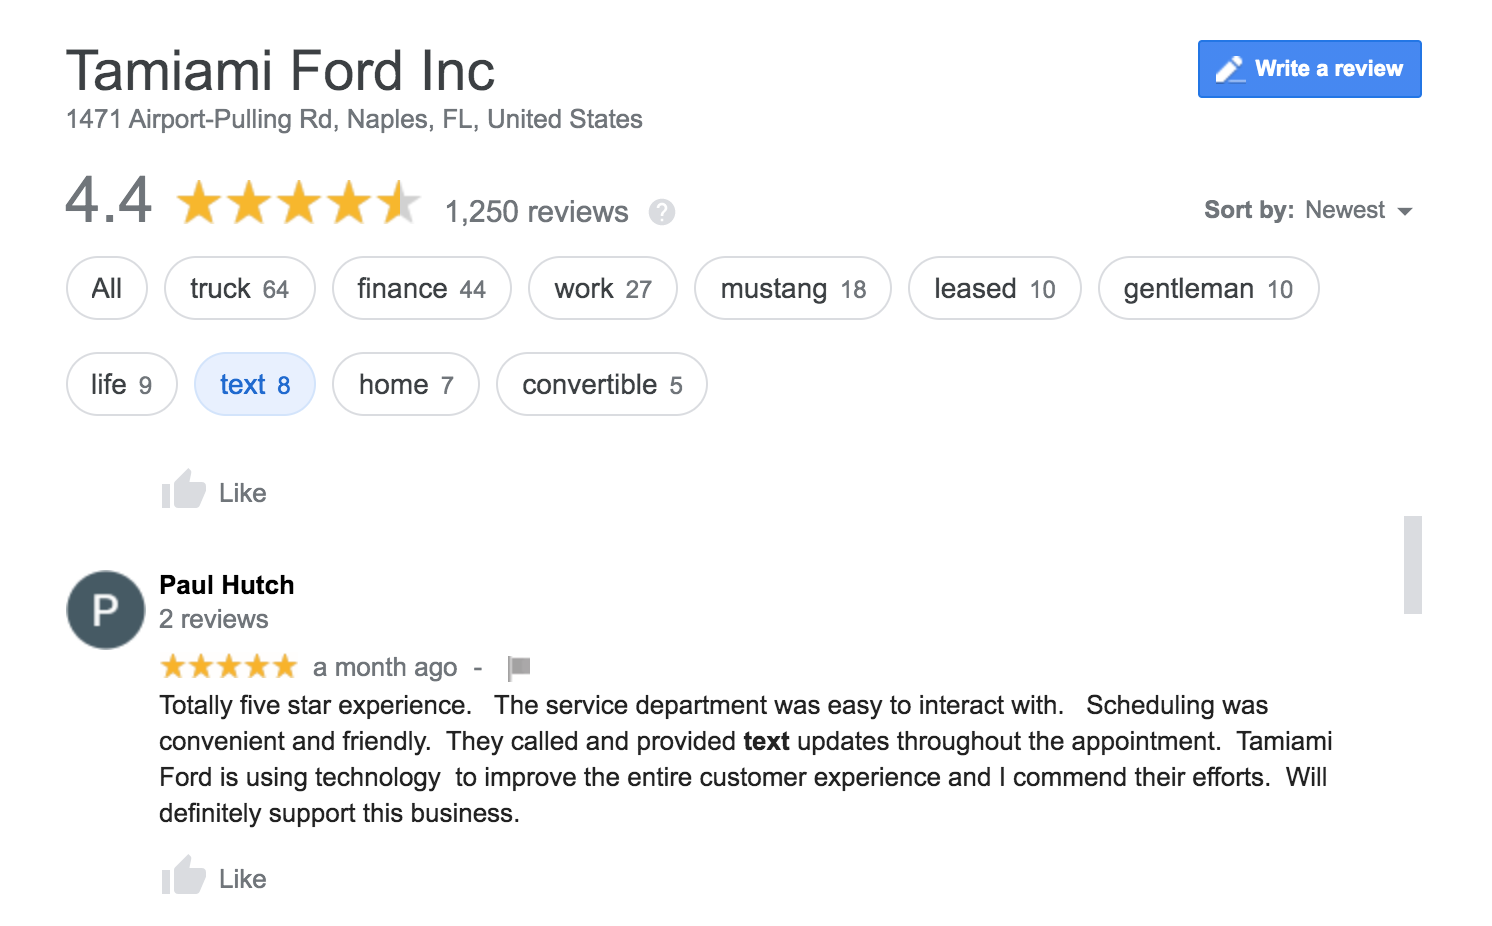 Tamiami Ford review example